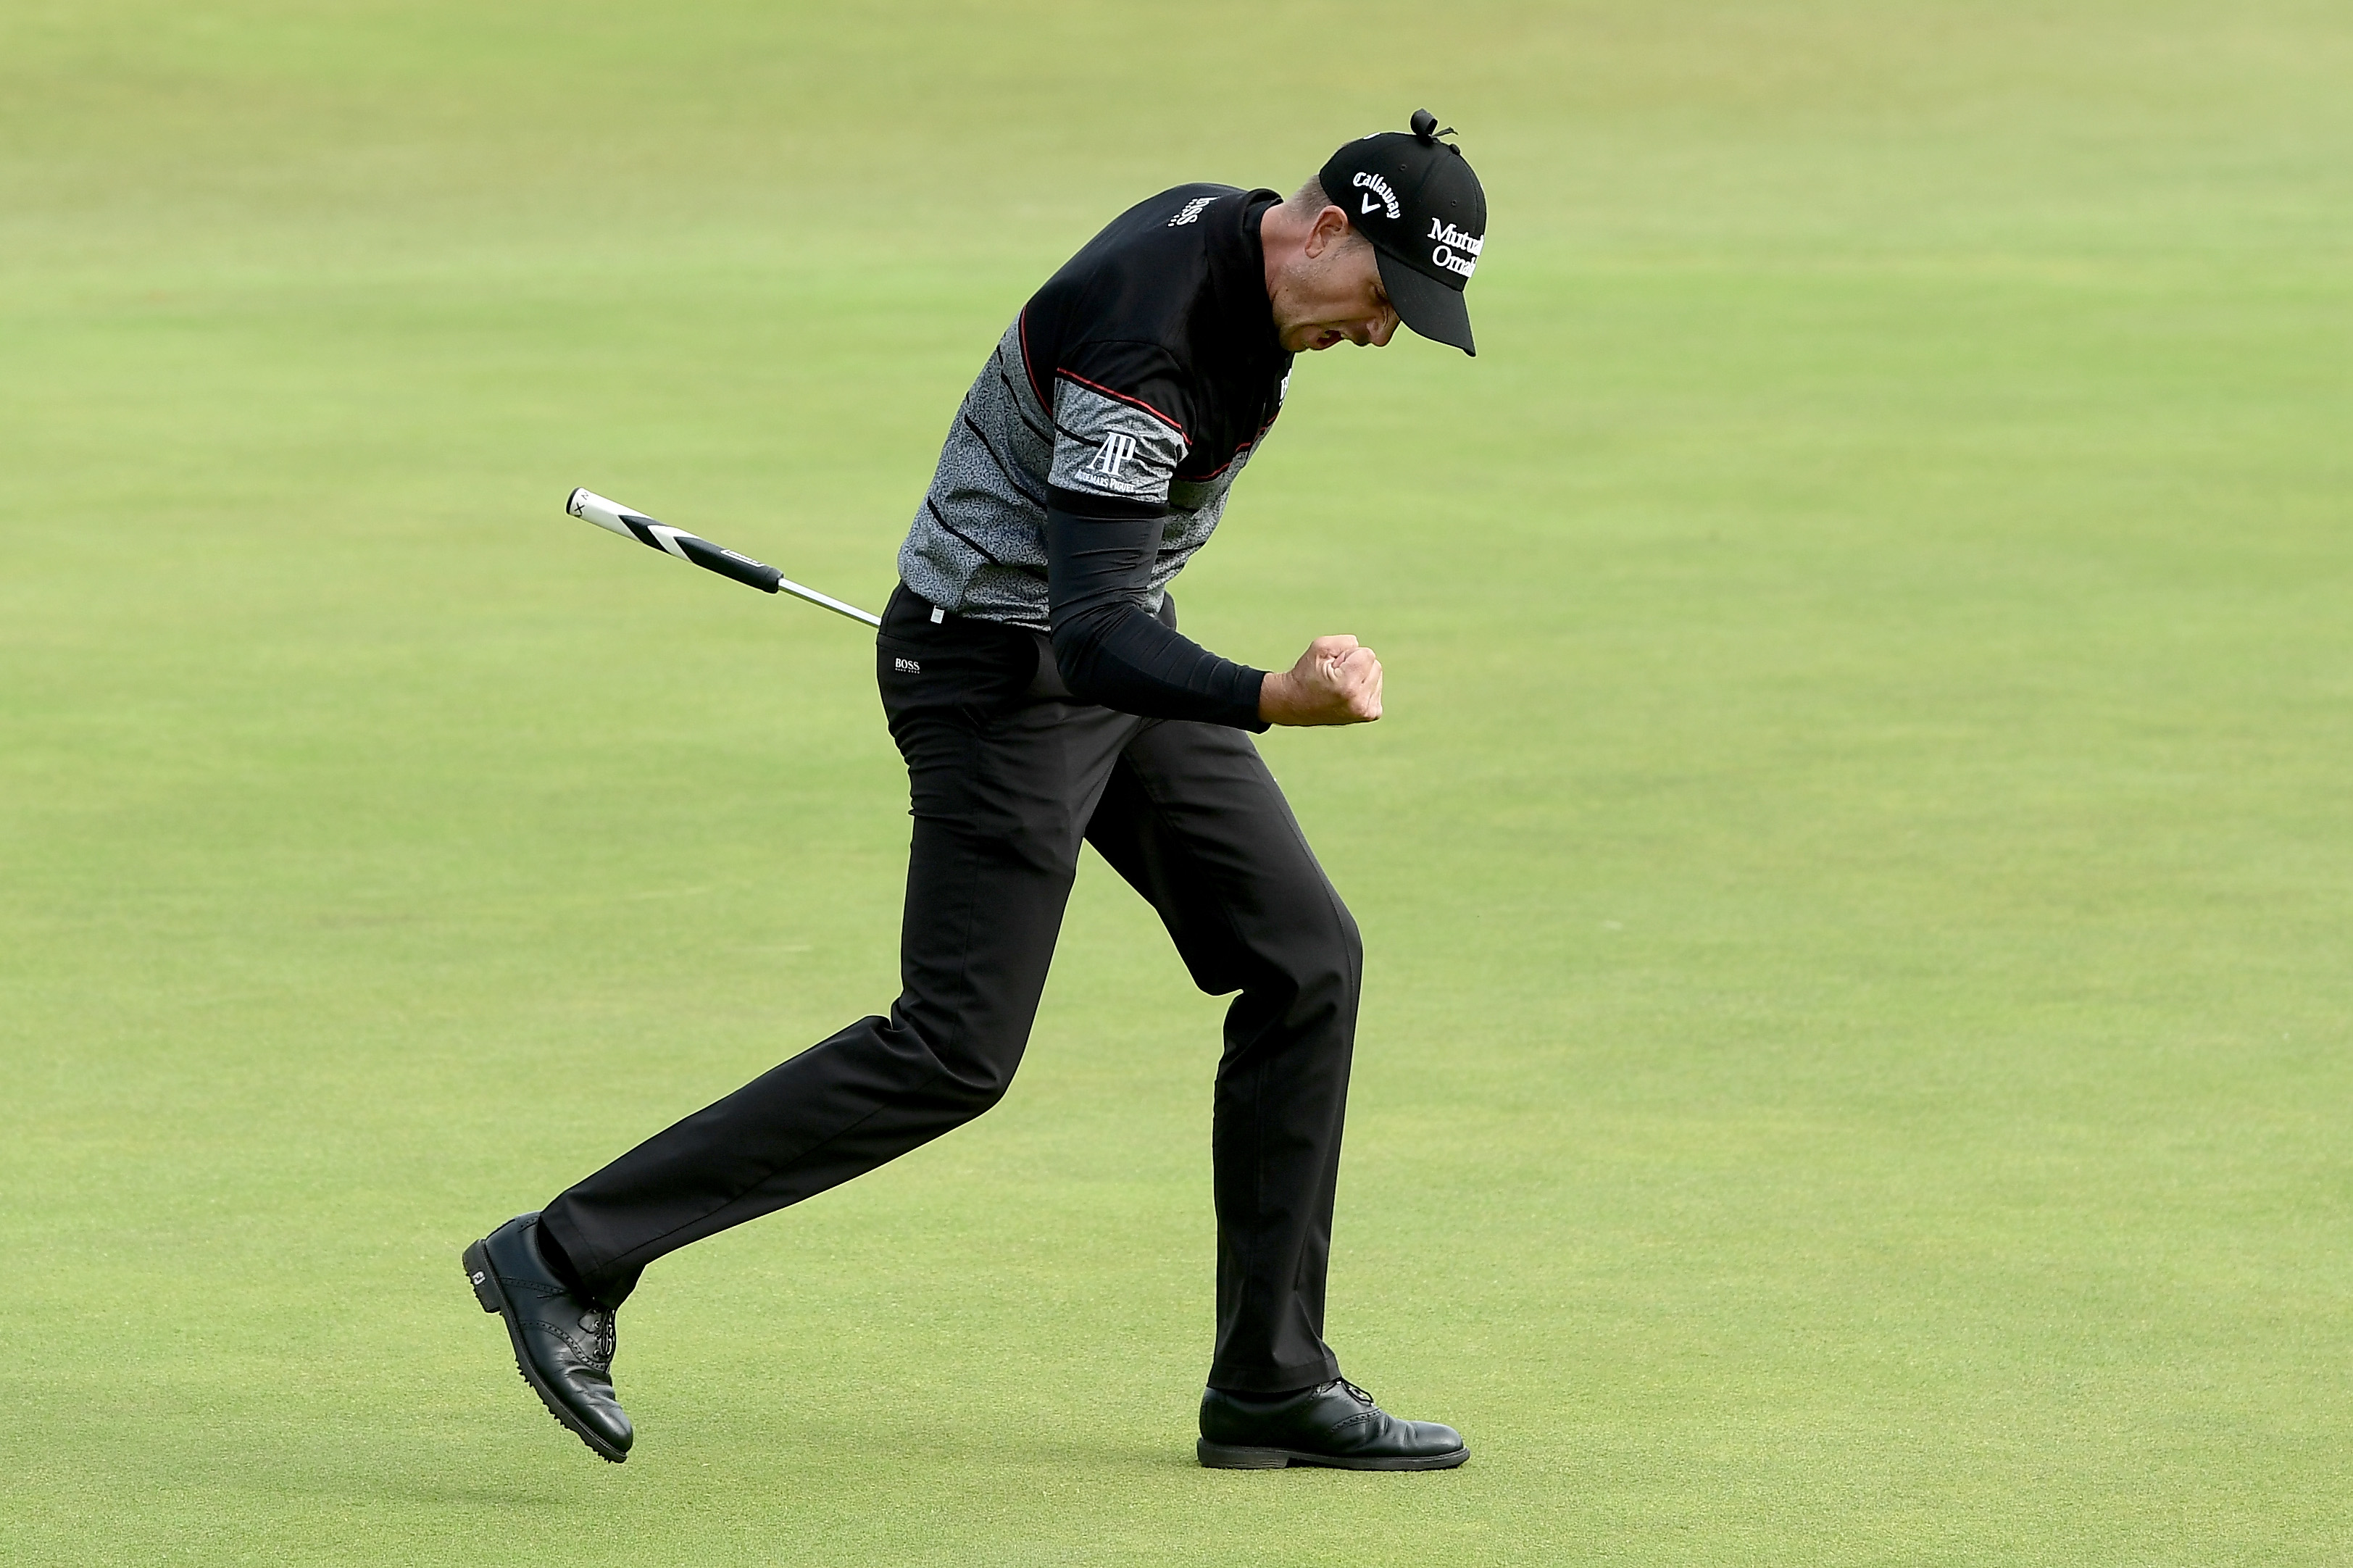 TROON, SCOTLAND - JULY 17: Henrik Stenson of Sweden reacts to a birdie putt on the 15th green during the final round on day four of the 145th Open Championship at Royal Troon on July 17, 2016 in Troon, Scotland. (Photo by David Cannon/R&A/R&A via Getty Images)